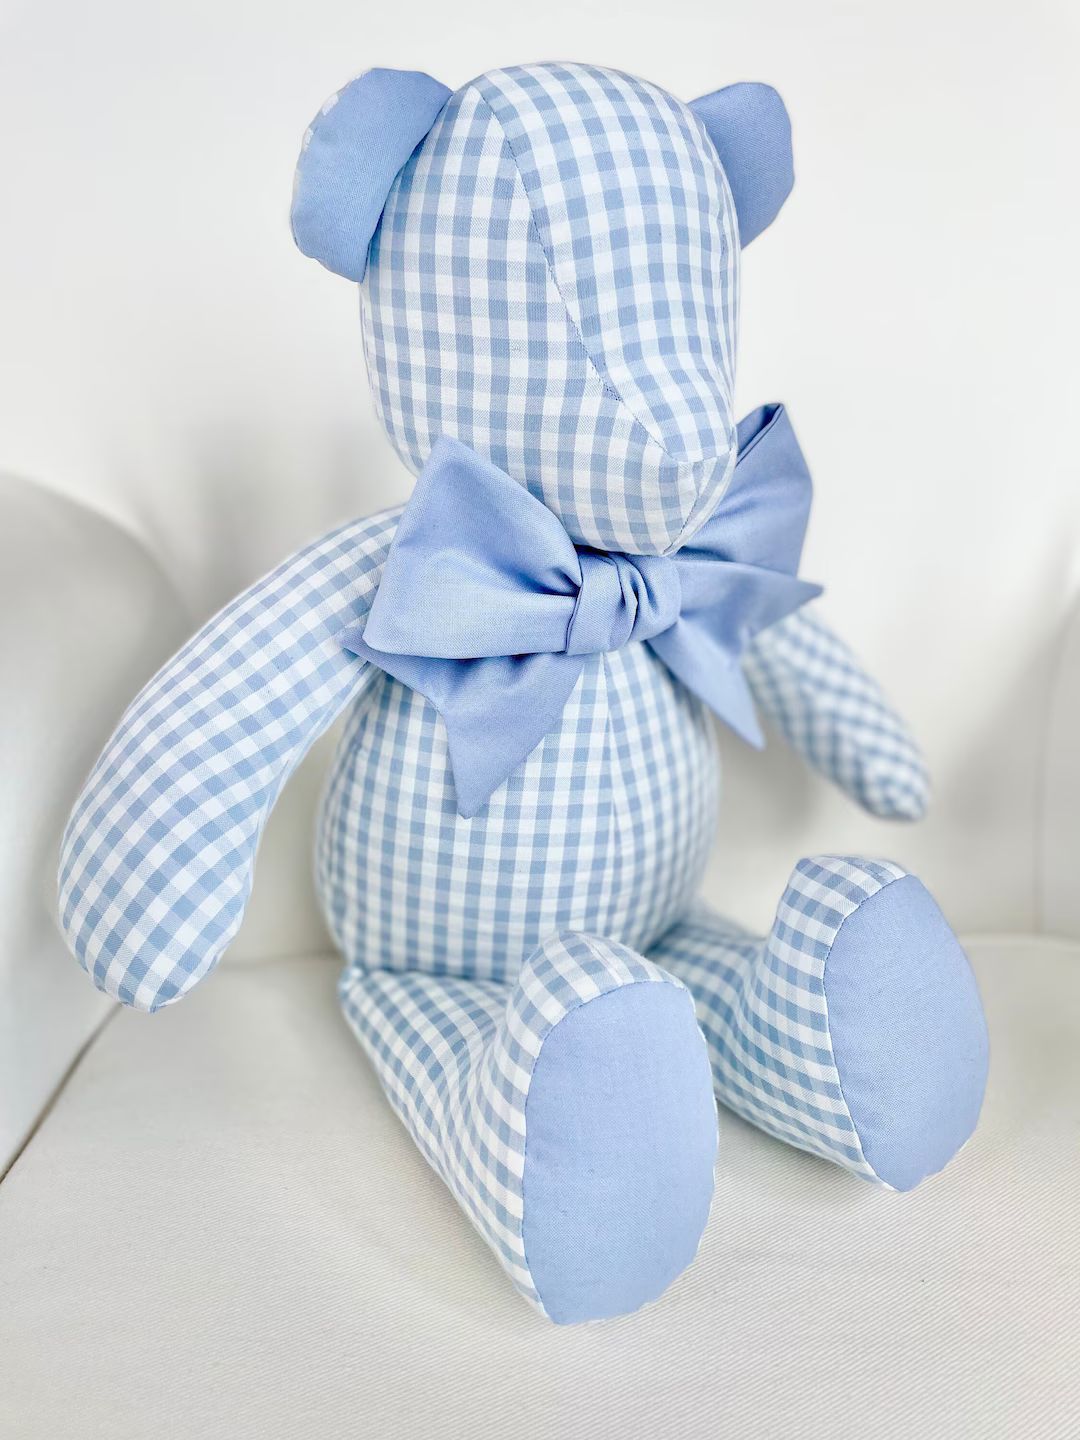 MADE to ORDER - Henry - Handmade Blue Gingham Teddy Bear with Soft Blue Accents | Etsy (US)